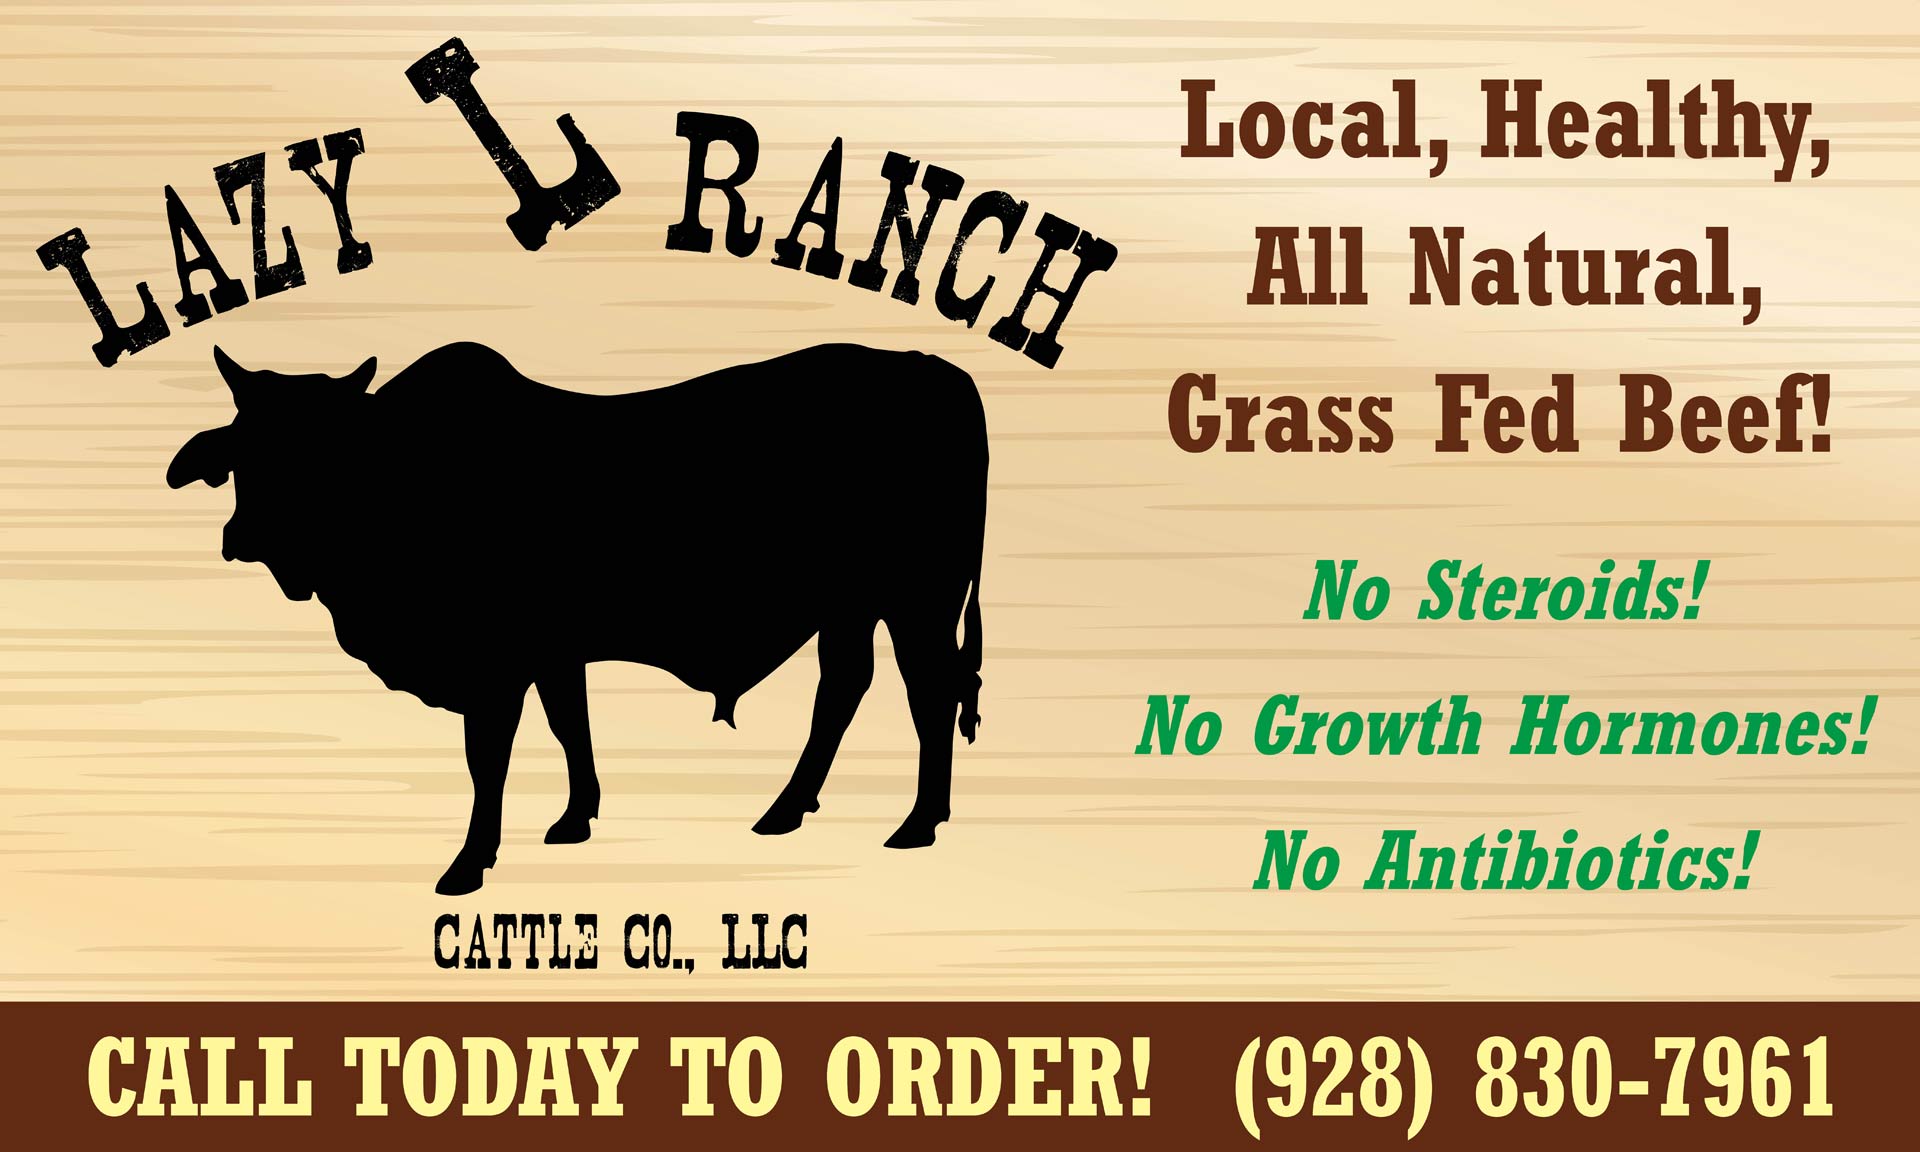 About Lazy L Ranch Beef